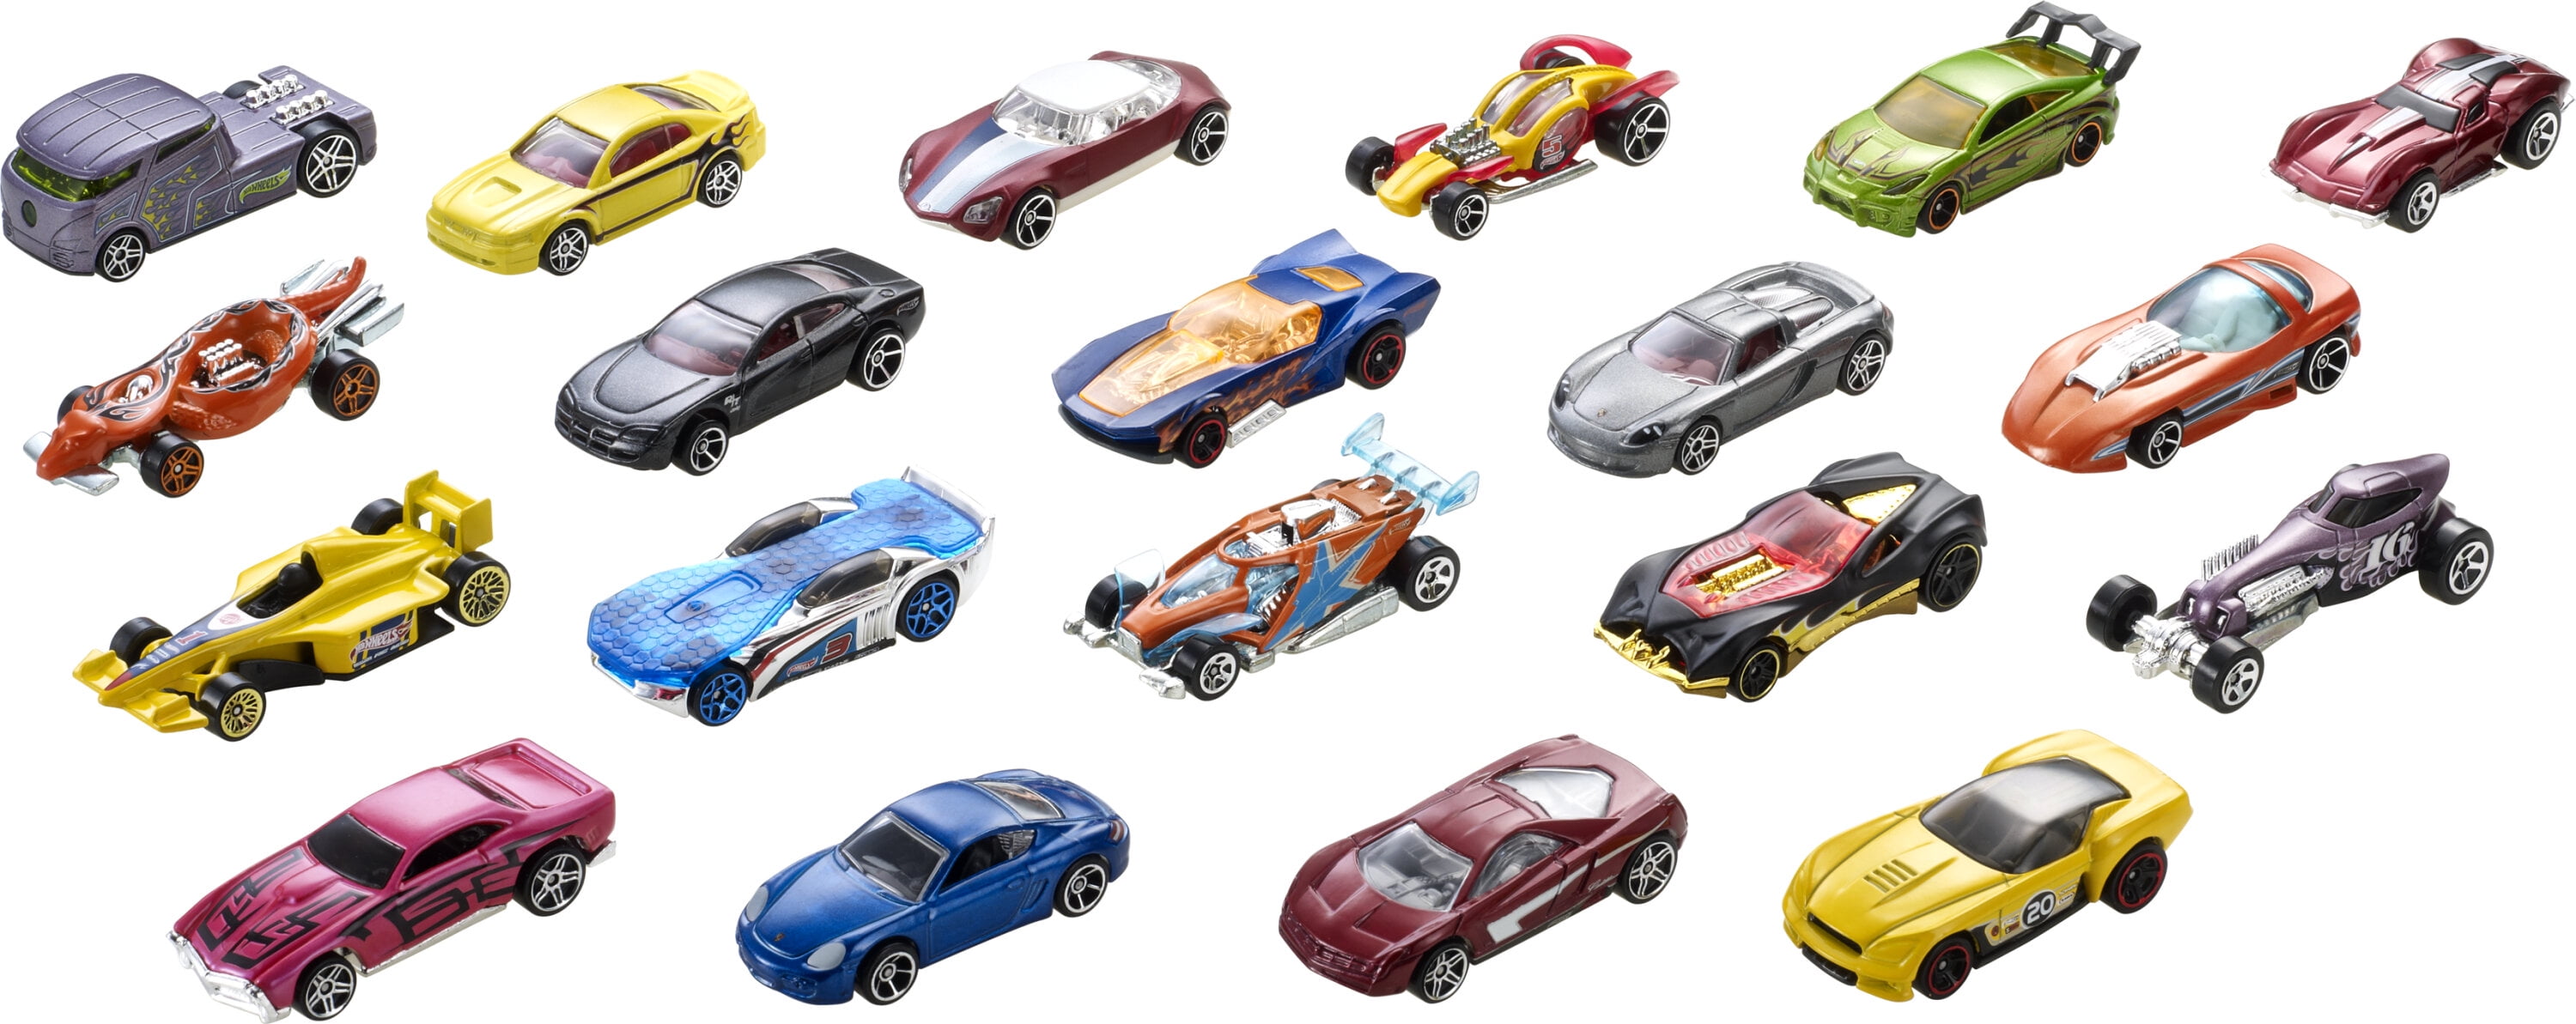 Hot Wheels 1:64 Scale Toy Cars & Trucks, 36-Pack (Styles May Vary) 